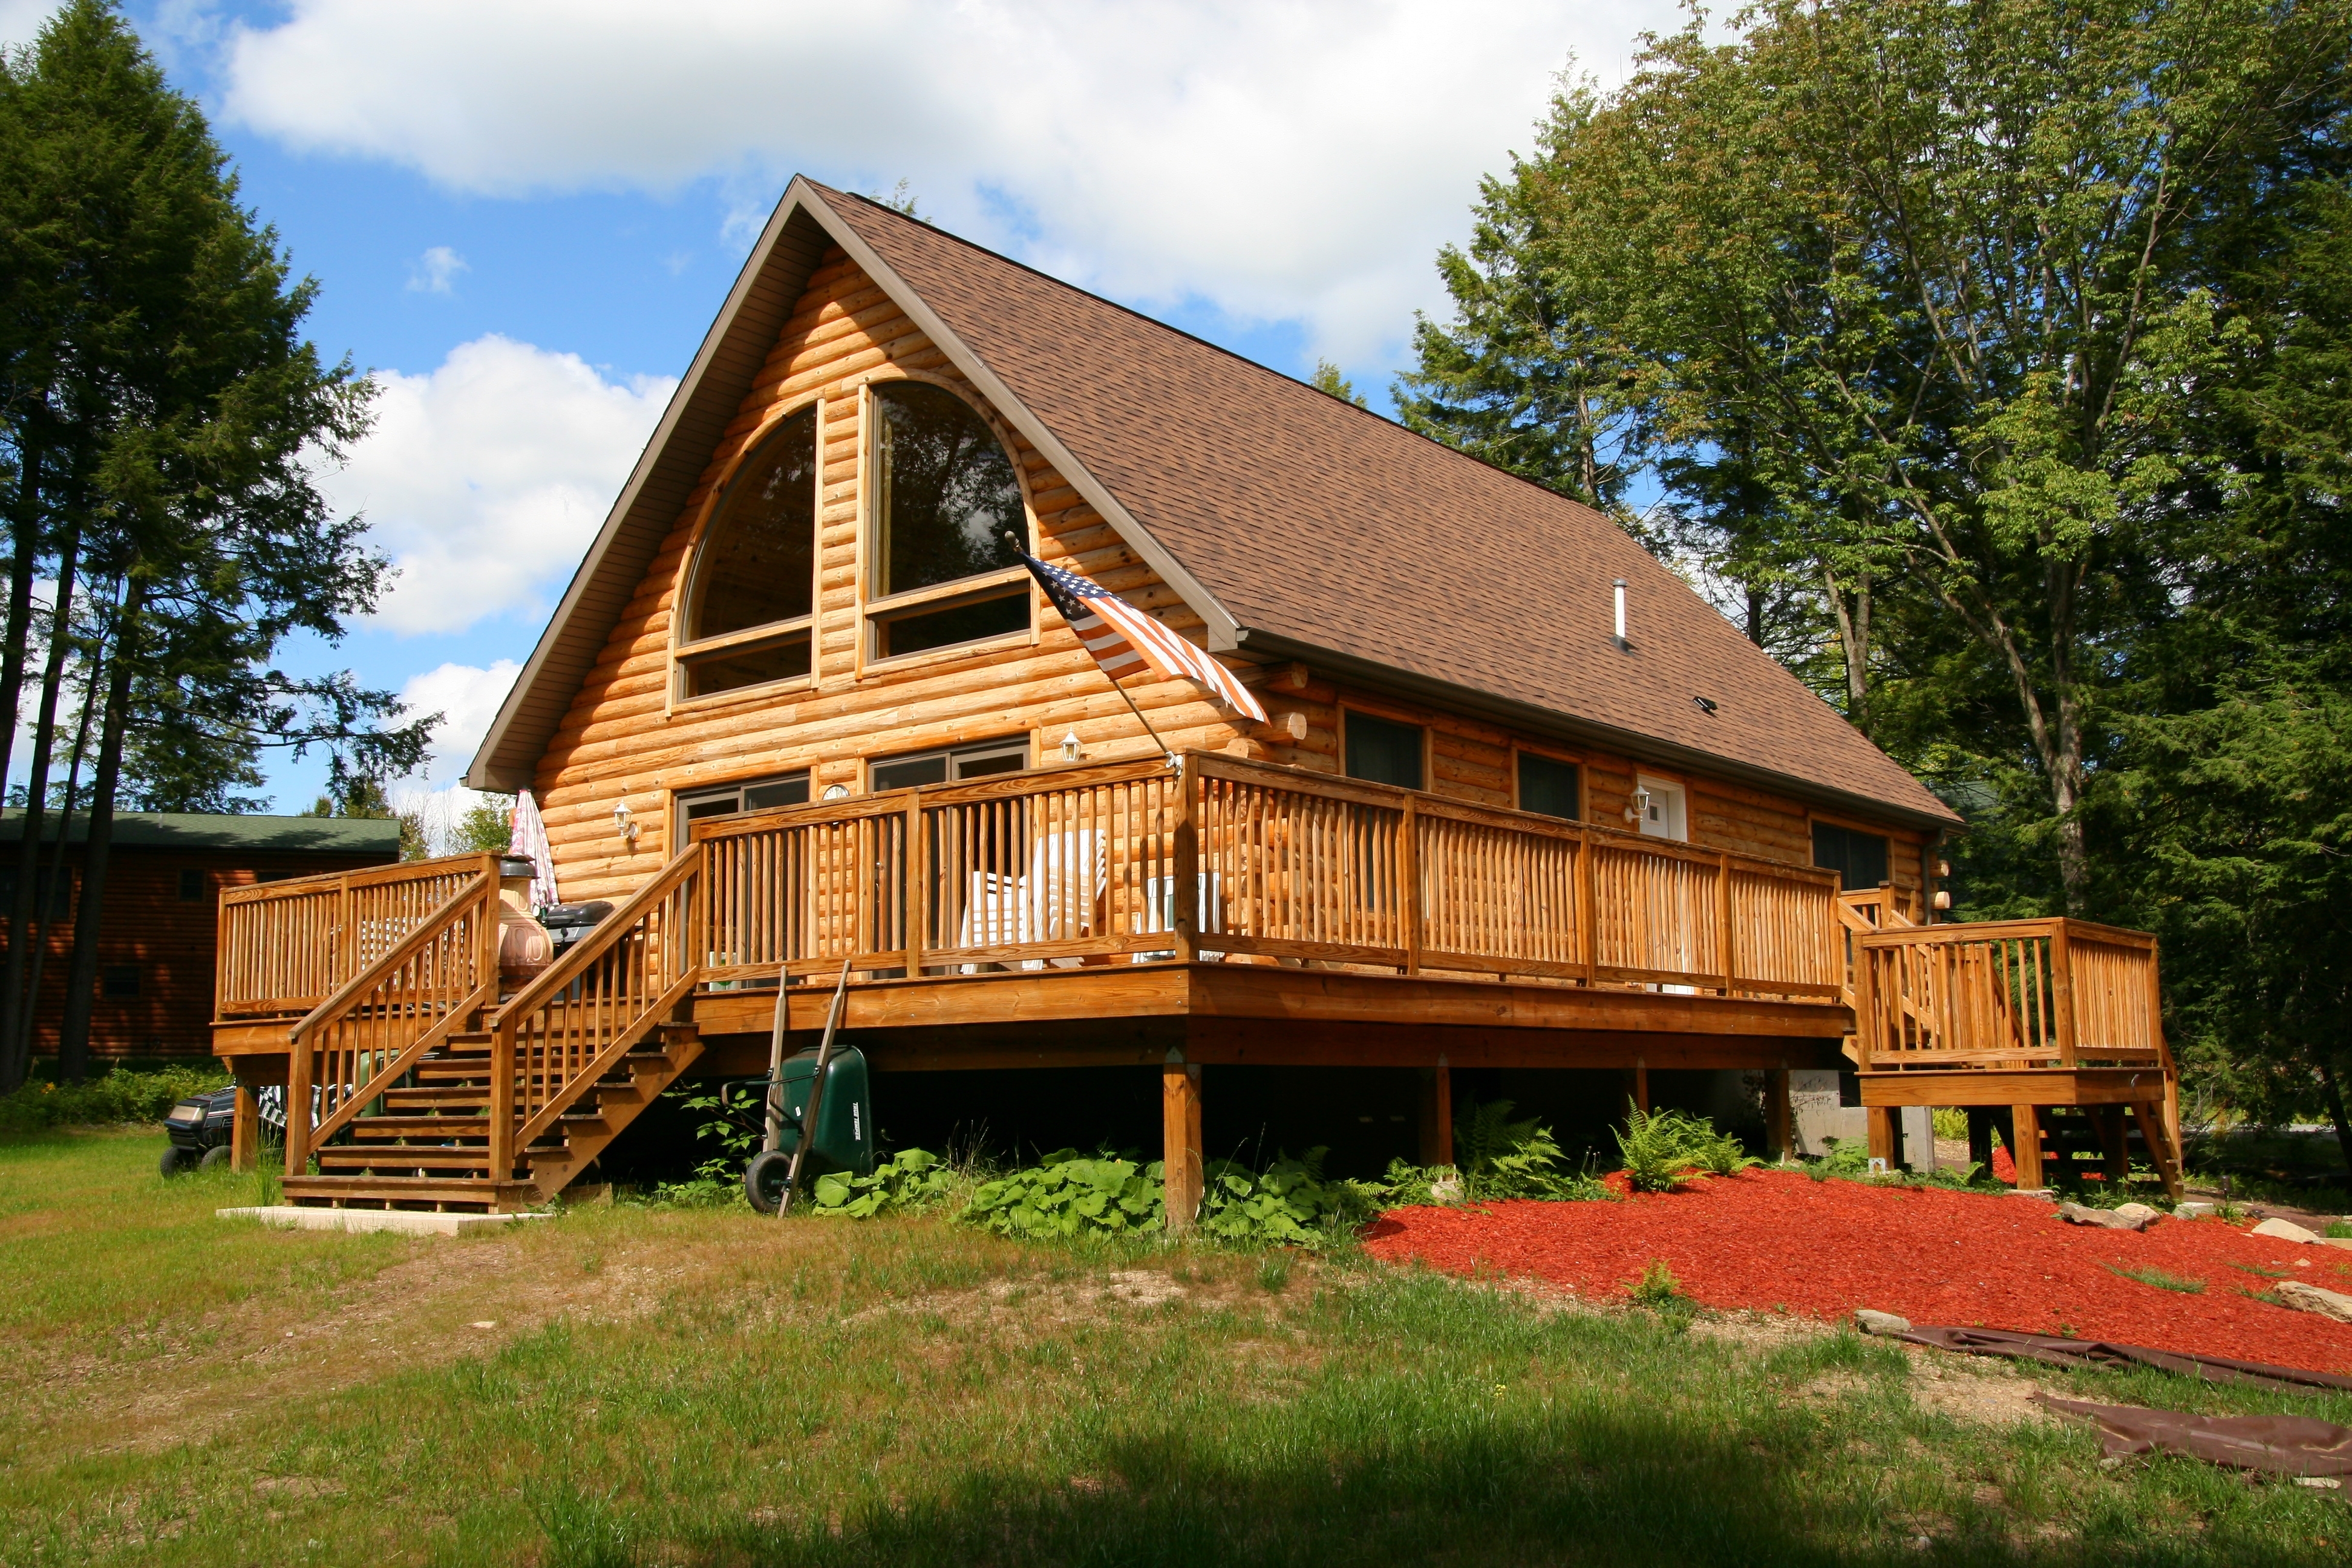 Exterio Log Cabin Pictures With Wrap Around Front Porch